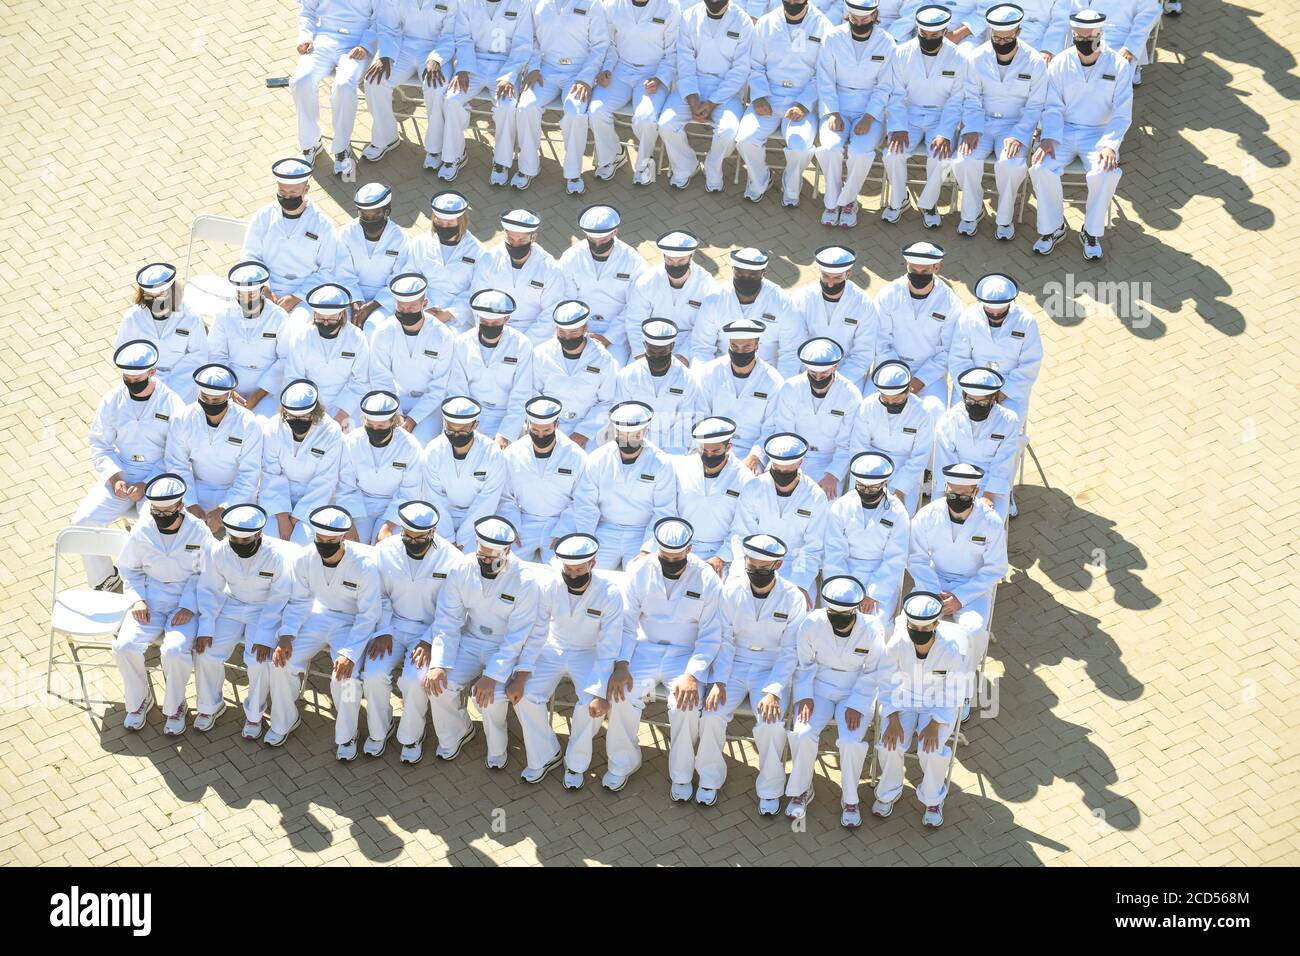 U.S. Naval Academy Navy midshipmen, wear PPE masks during the Oath of Office ceremony July 18, 2020 in Annapolis, Maryland. Oath Day marks the beginning of the shortened four-week indoctrination period called Plebe Summer, intended to transition the candidates from civilian to military life. Stock Photo